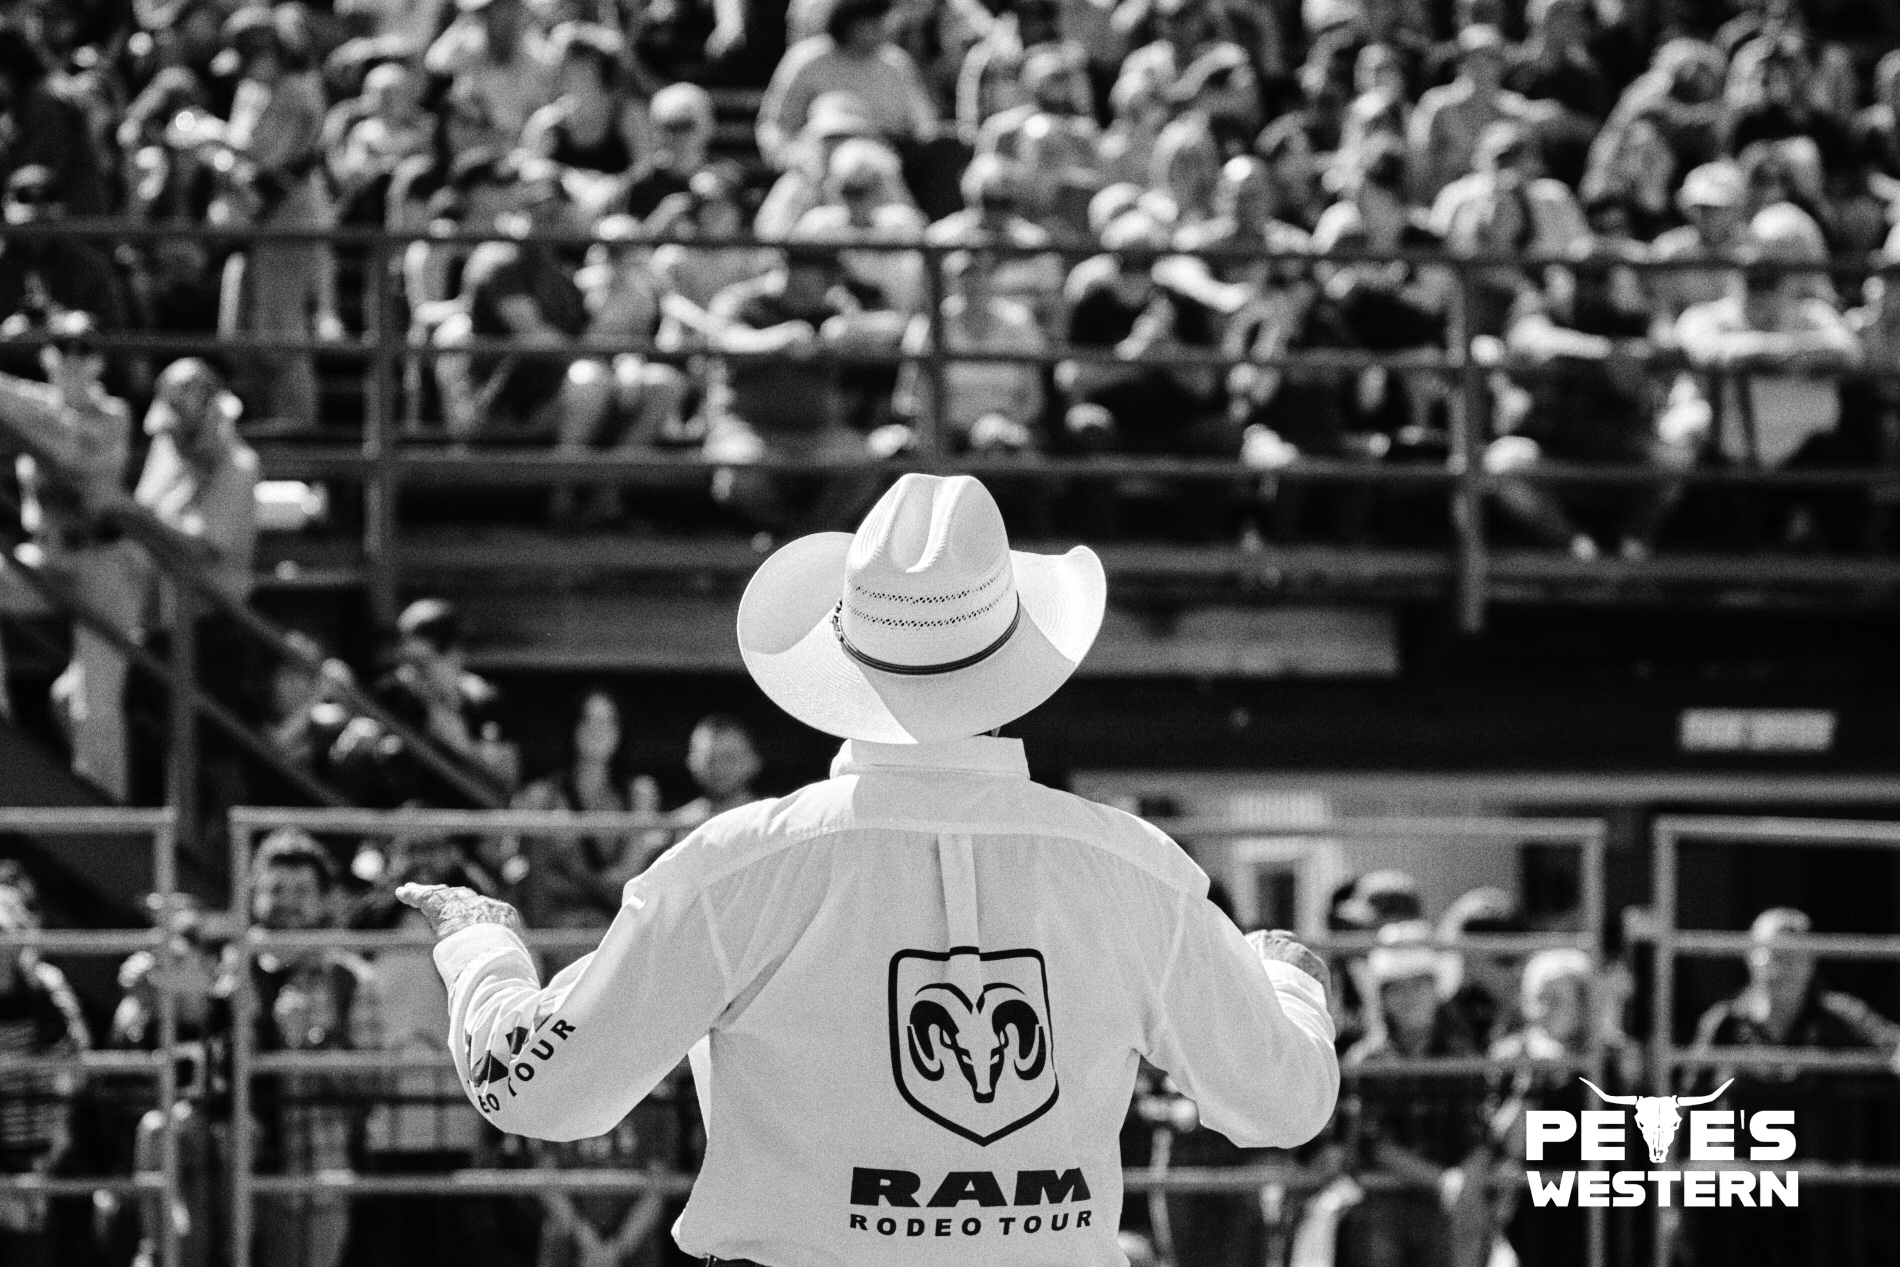 Ross Millar is the official Ram Rodeo Tour announcer and manager.